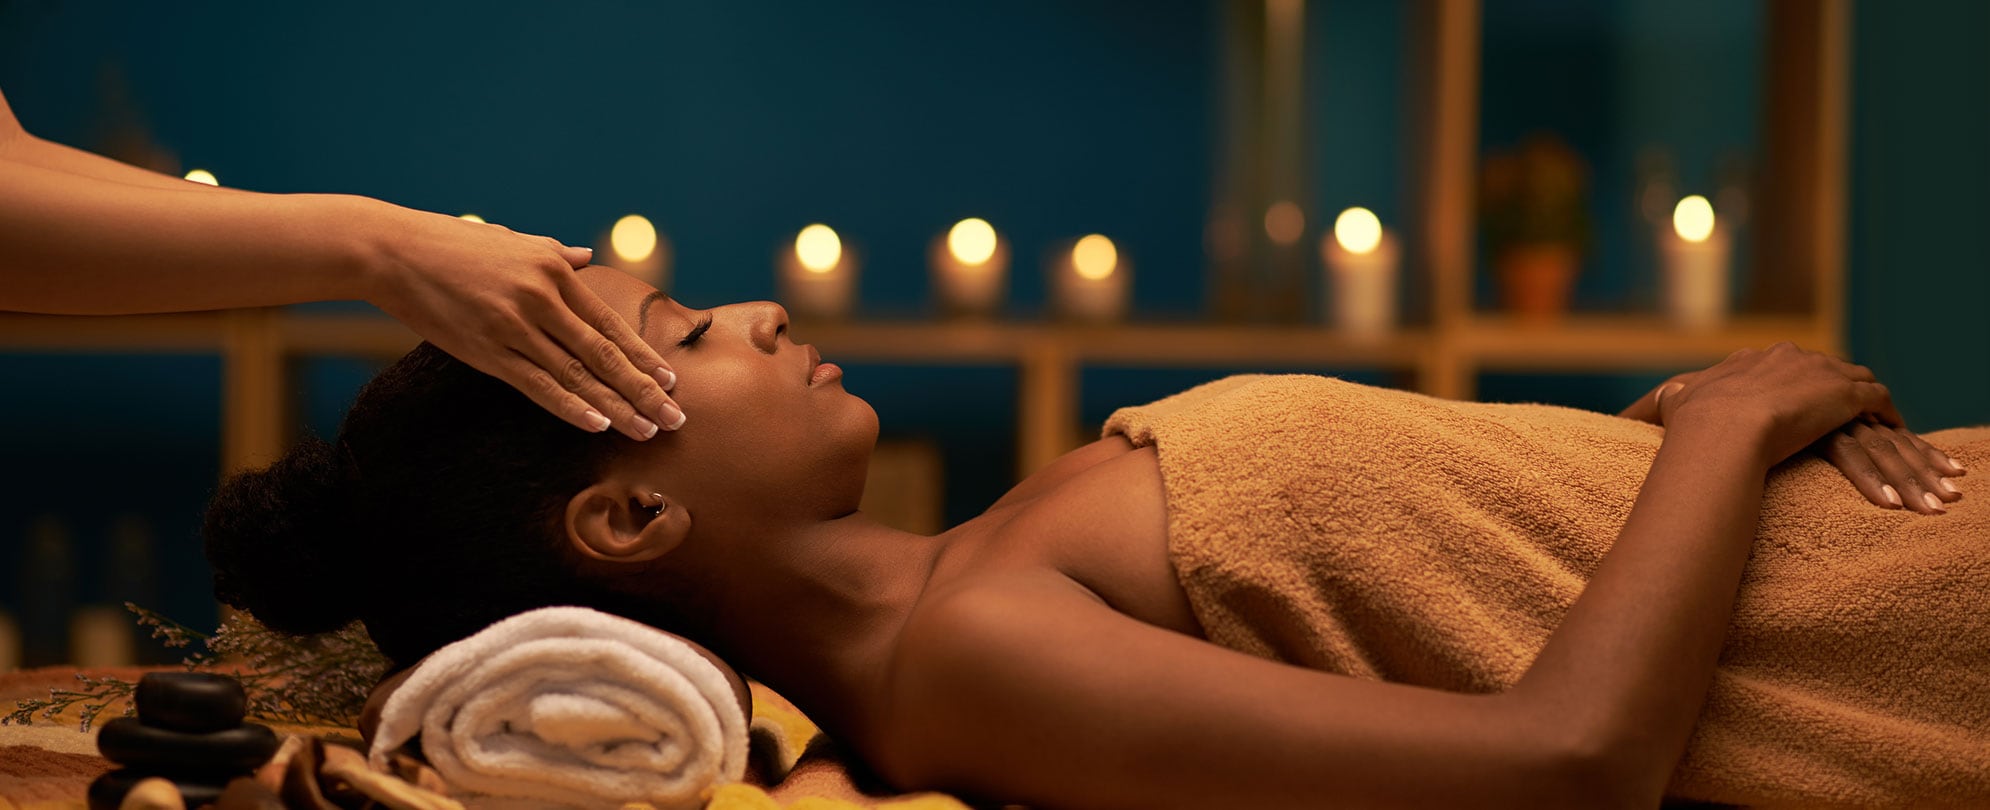 A woman receiving a massage and enjoying aroma therapy in dimly lit spa